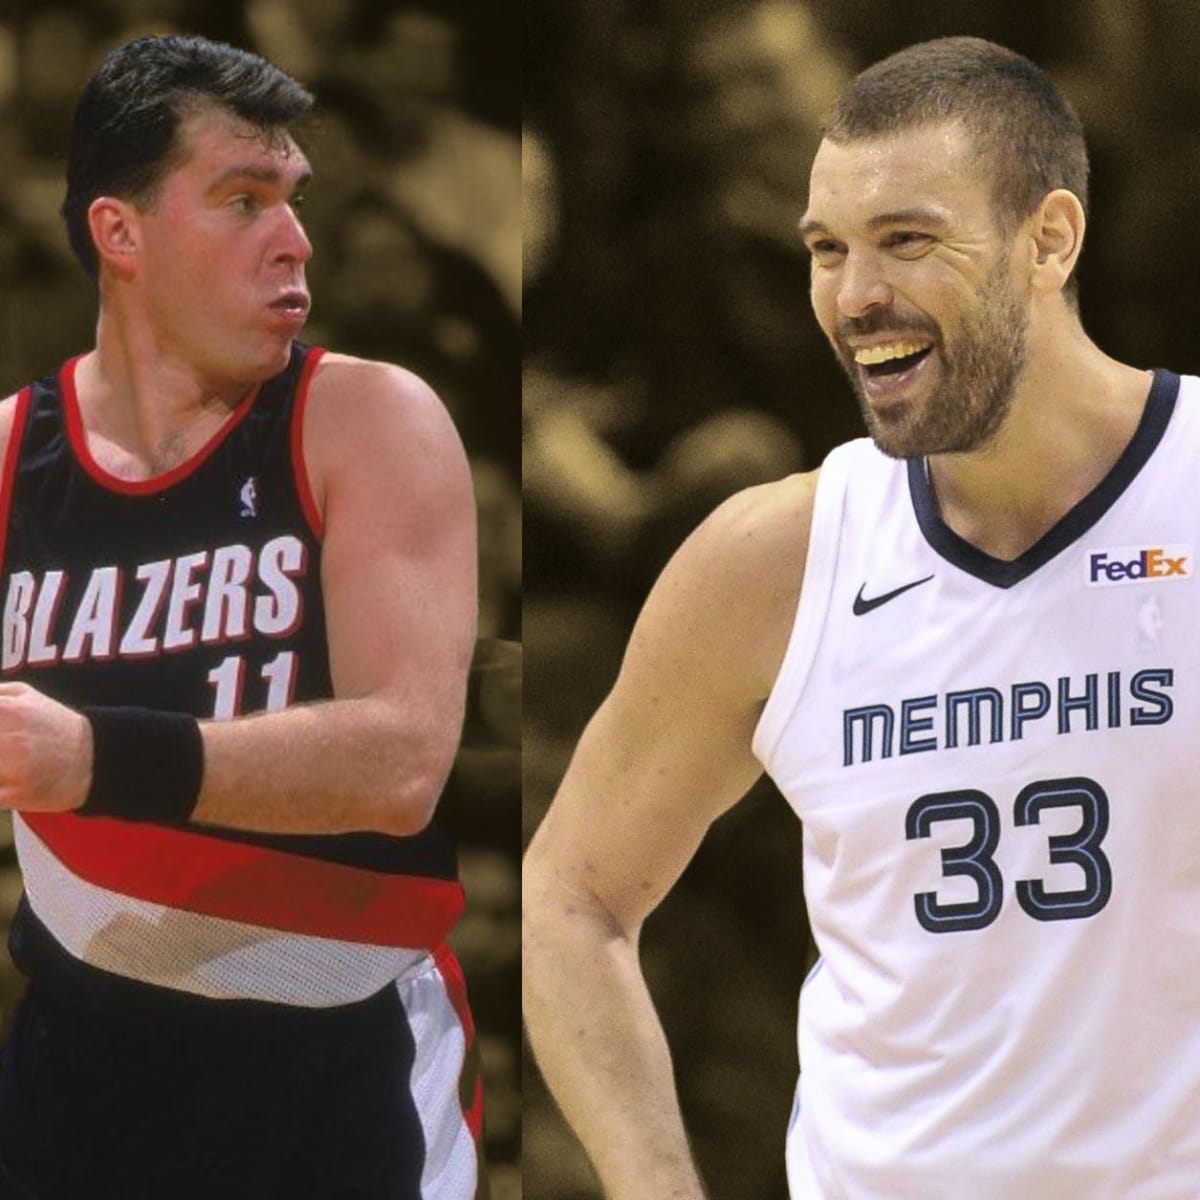 The Story of Jason Peters and Marc Gasol (Part III and Part IV)